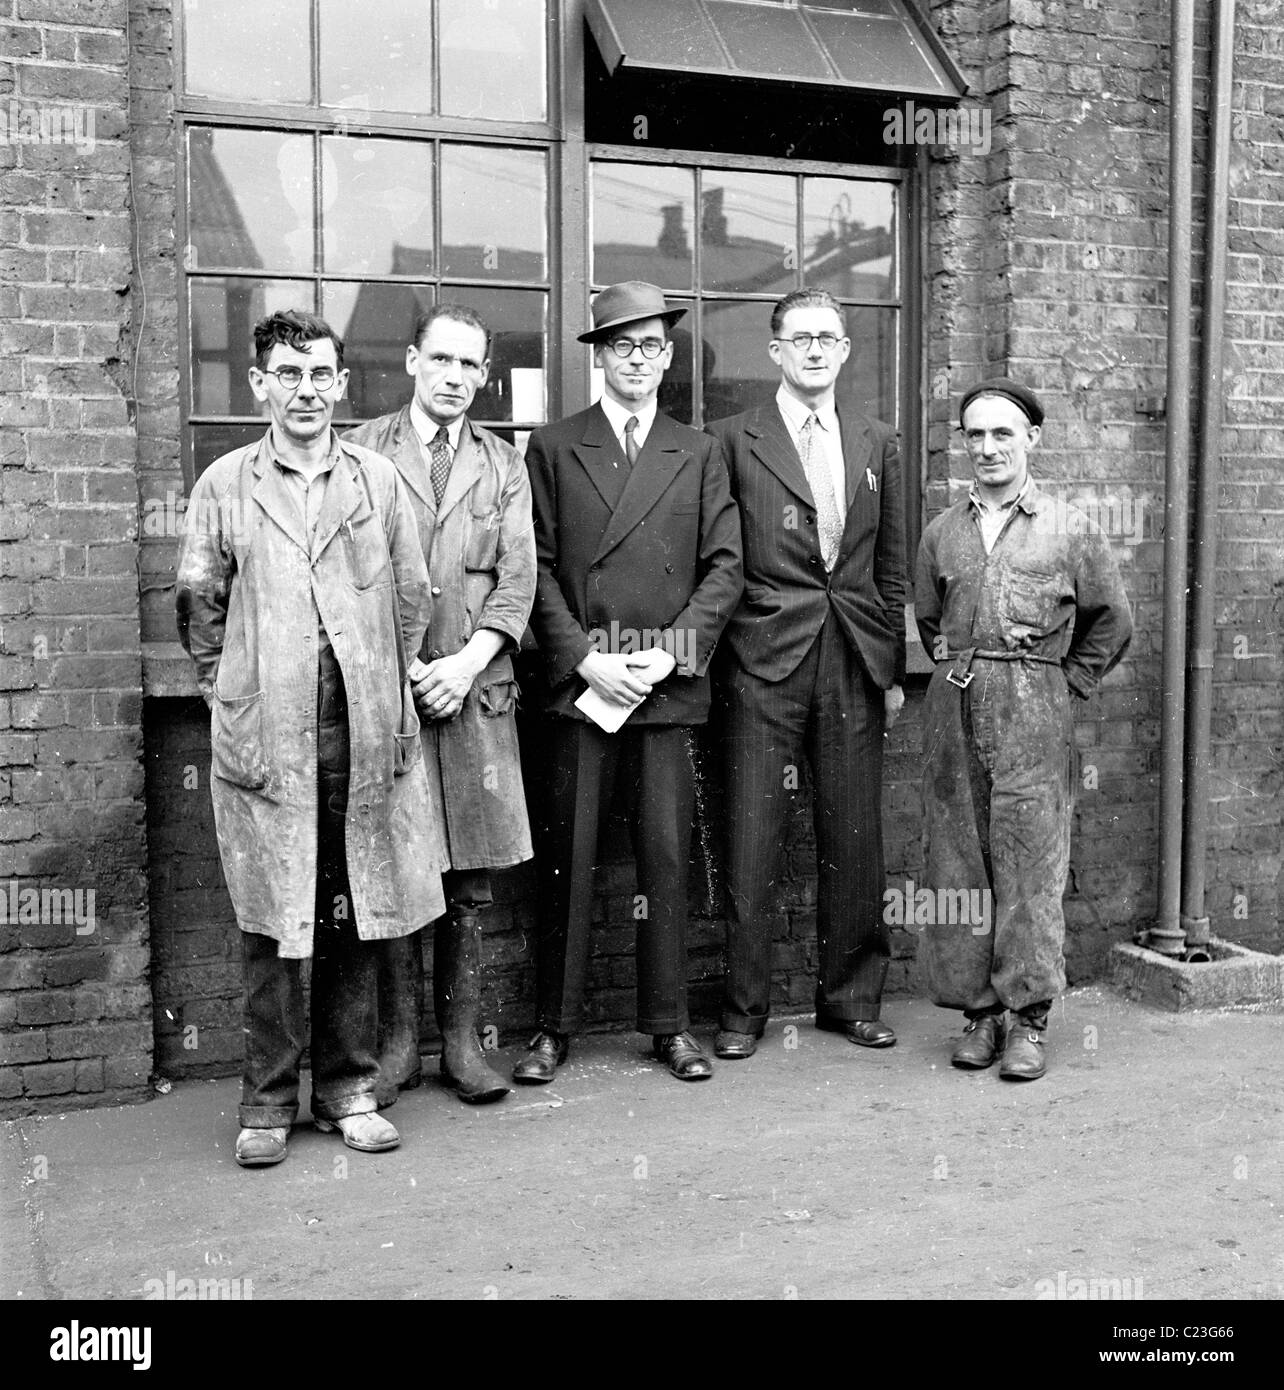 1950s, England. Male Workers and management at the Ever Ready Battery factory line-up outside the building for a group photo. Stock Photo